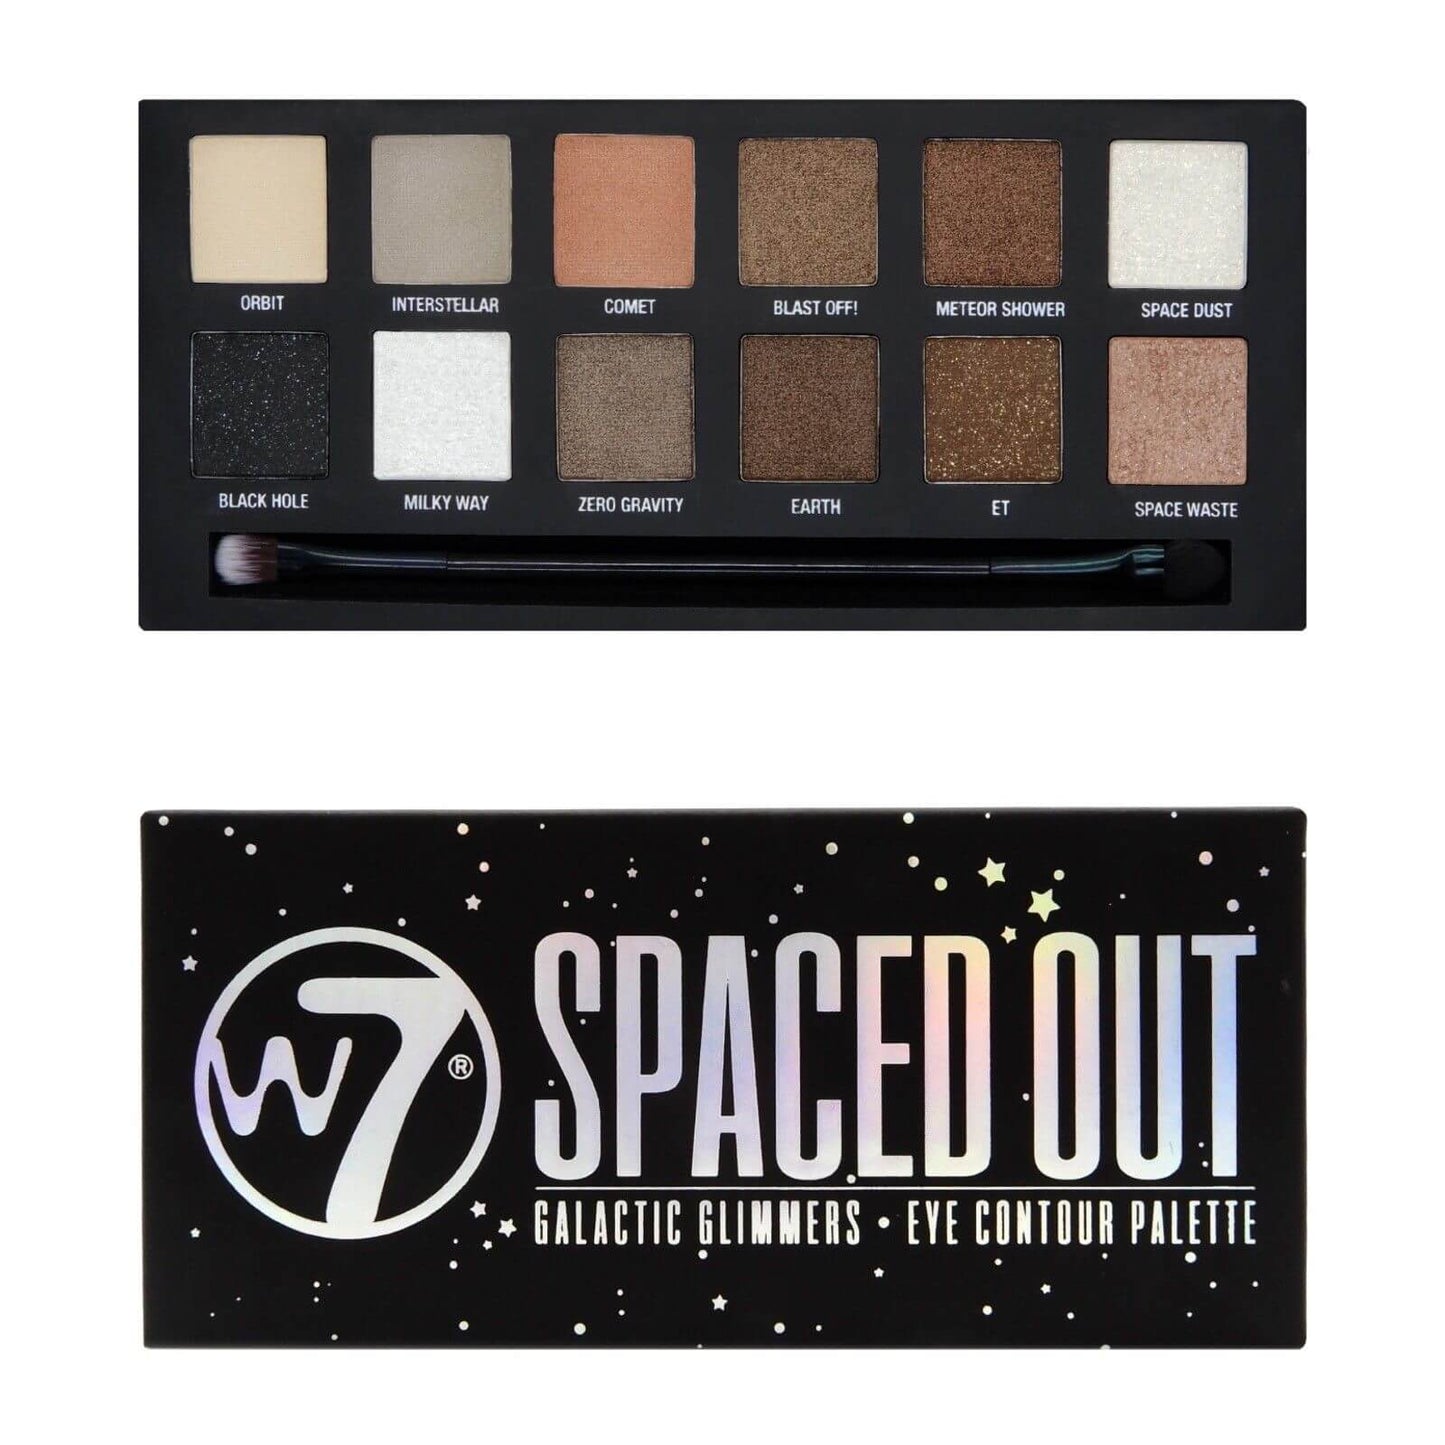 W7 Spaced Out Eyeshadow Palette